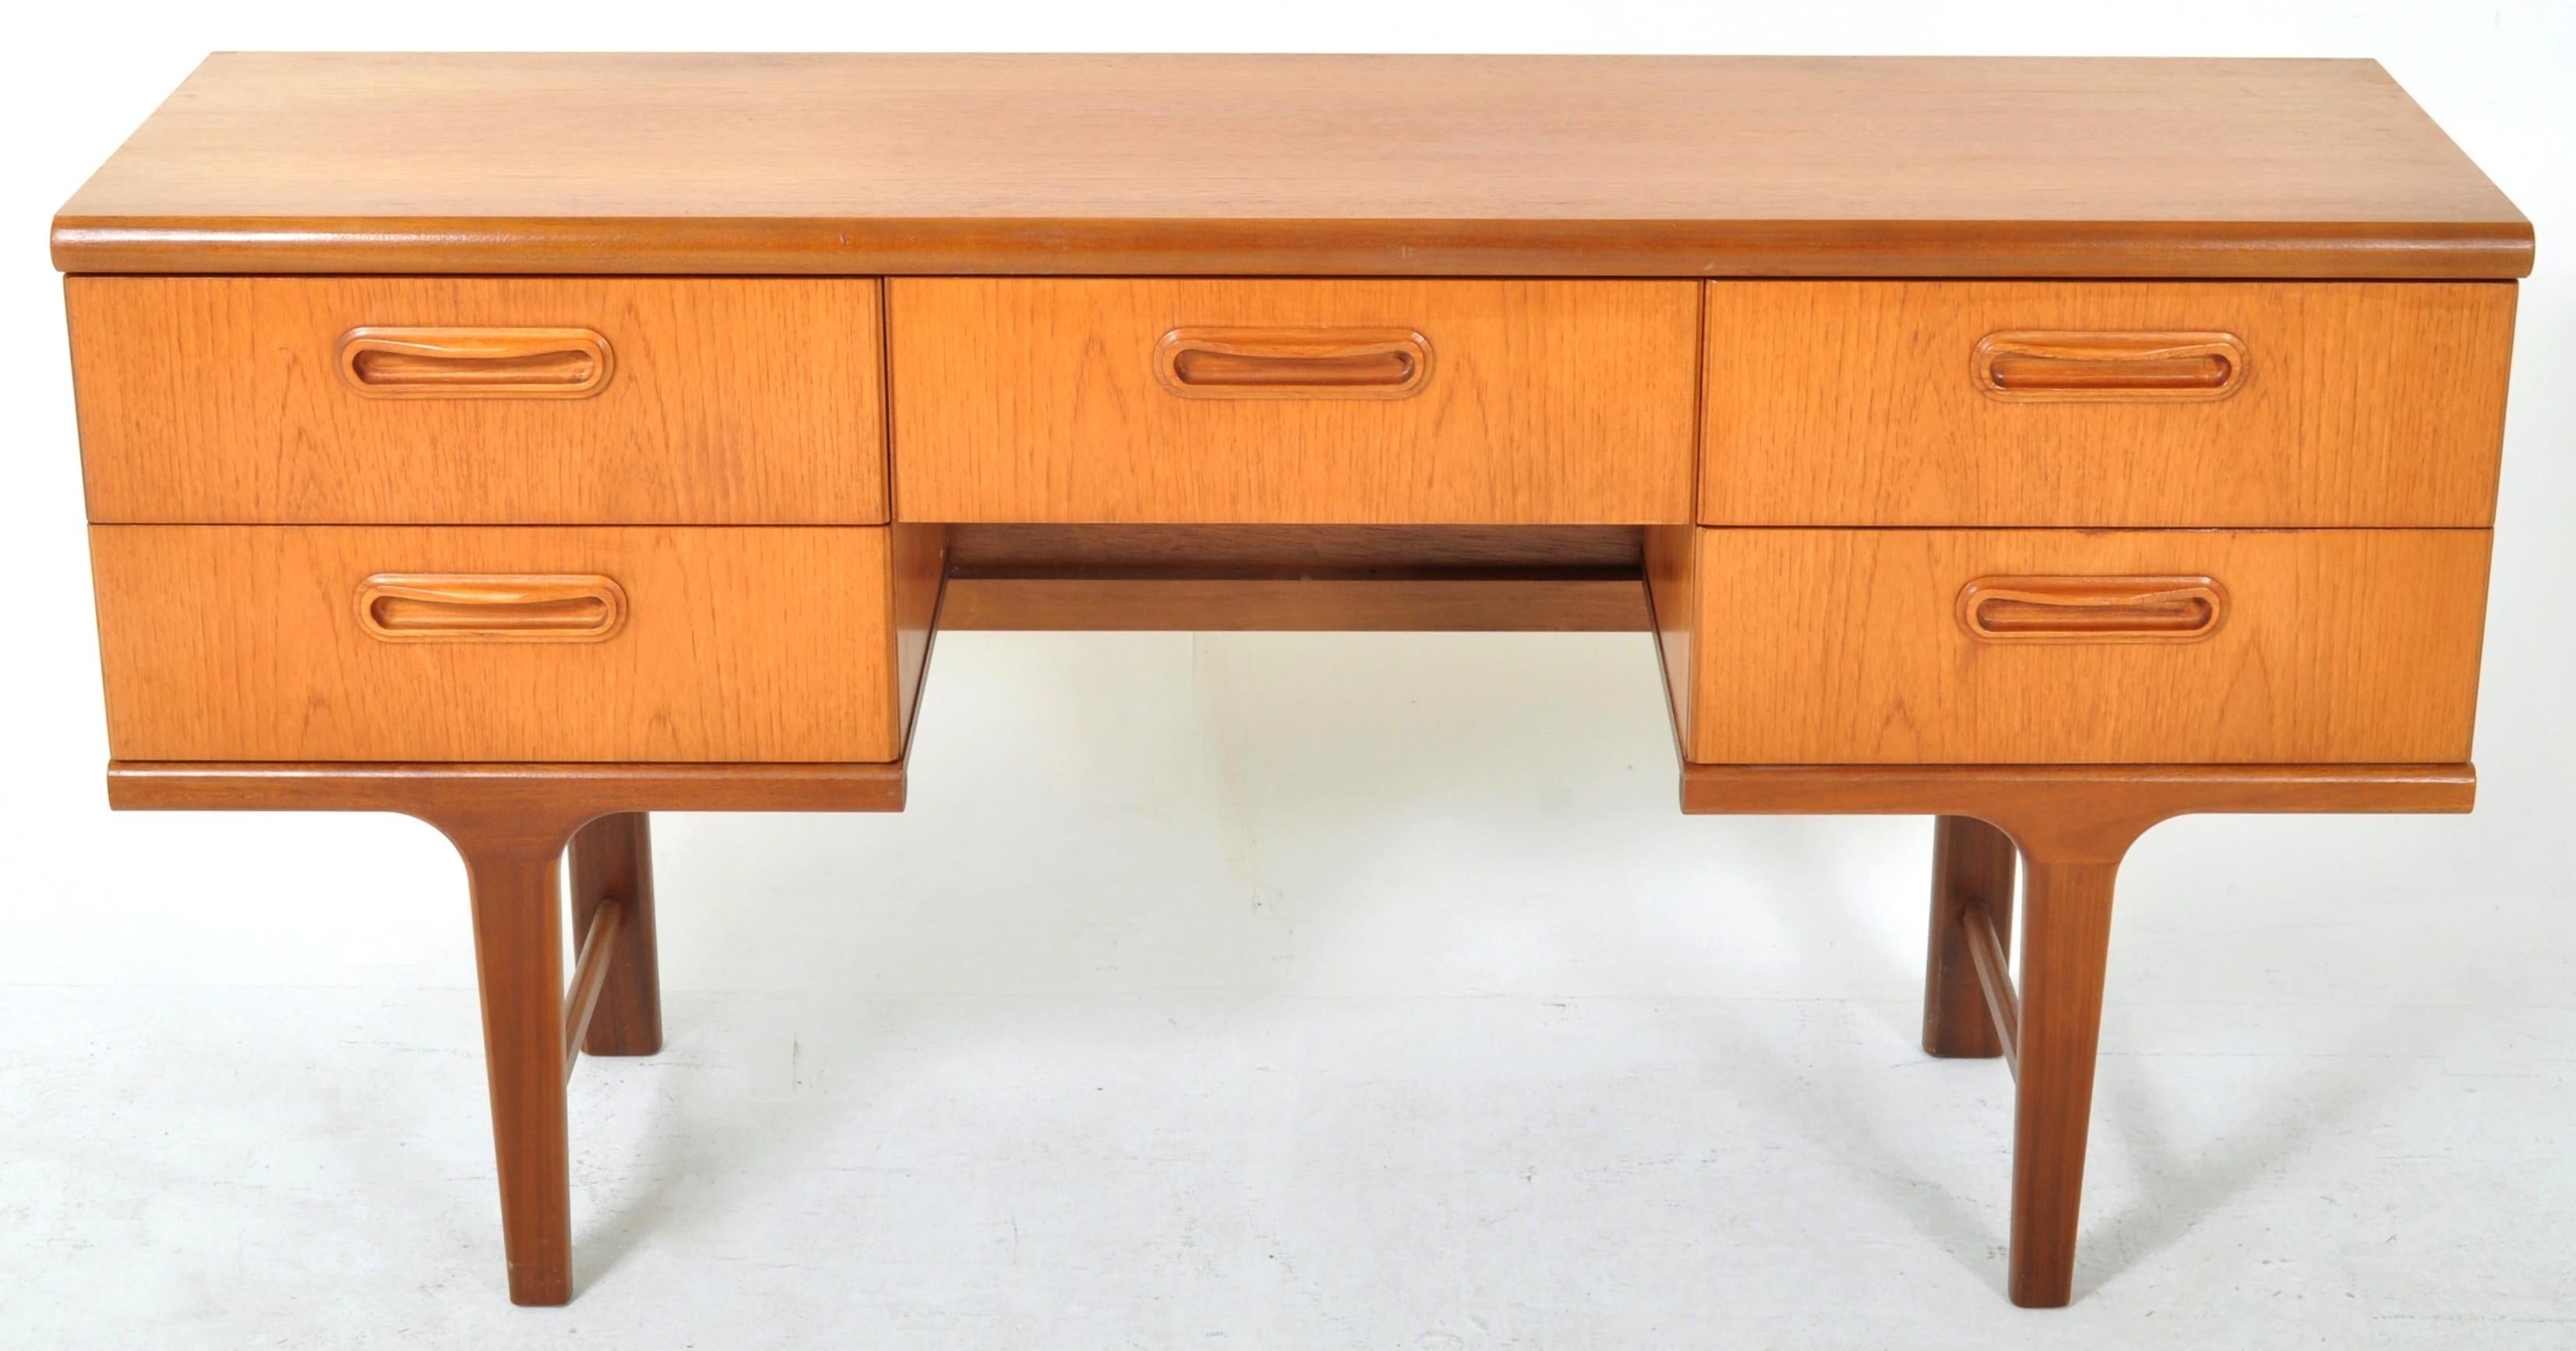 Mid-Century Modern Danish style teak desk, 1960s. The desk of twin pedestal form with a central knee-hole with a single drawer above and flanked on each side by a pair of drawers. The desk standing on gently tapered legs joined by cross stretchers.